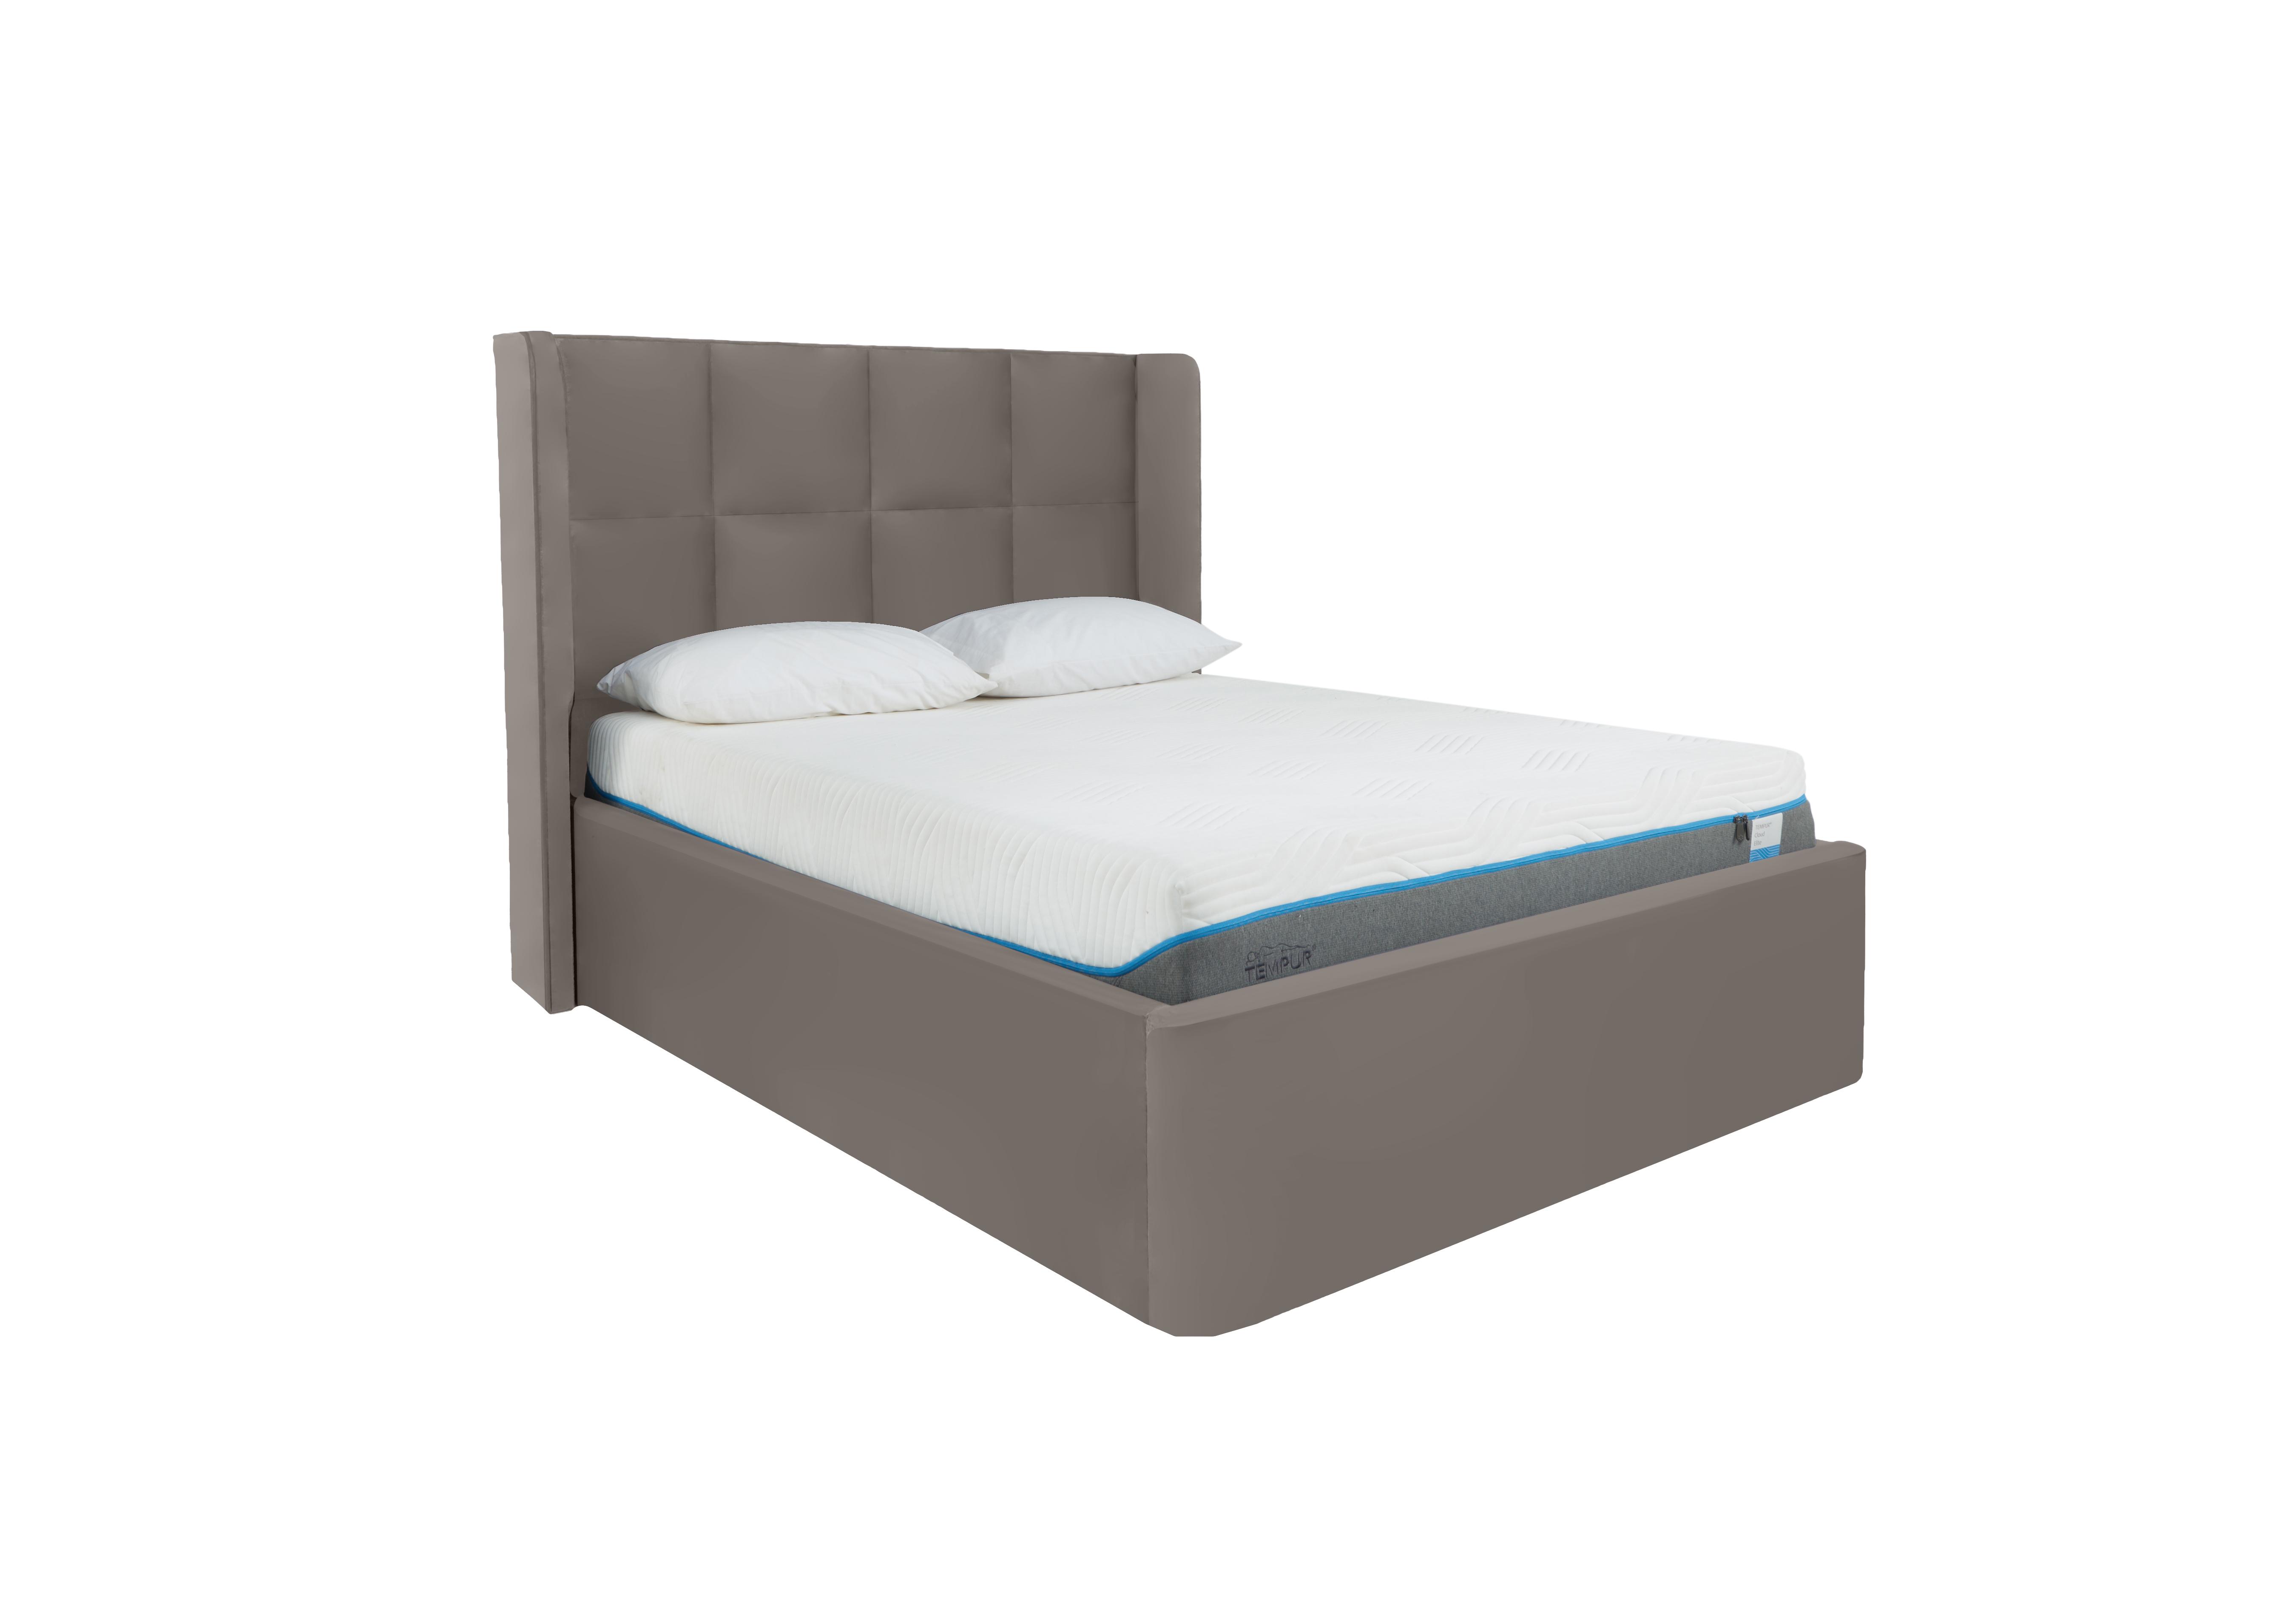 Shiva Ottoman Bed Frame in Sanderson Potters Clay on Furniture Village